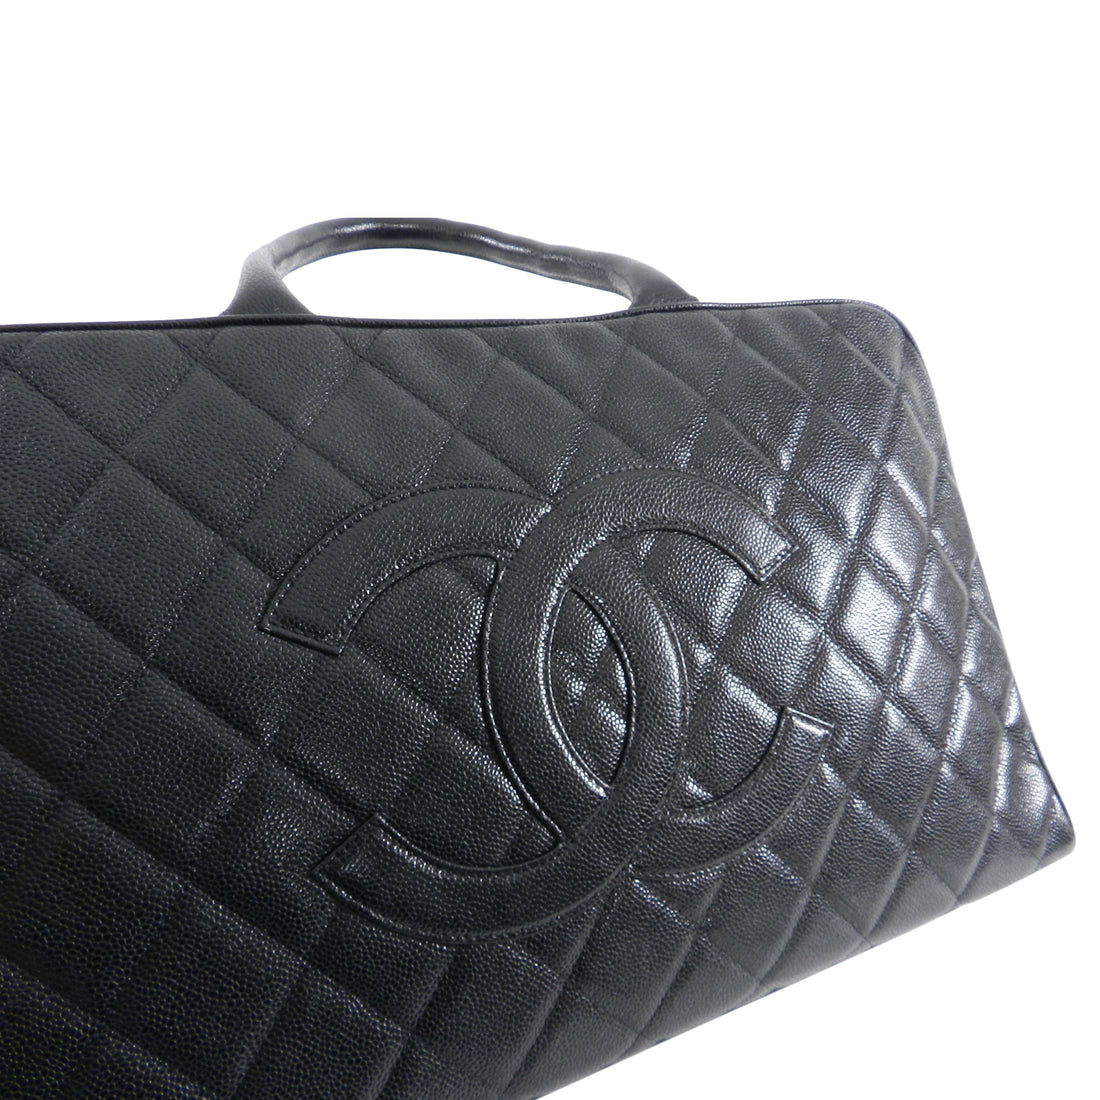 Chanel Caviar Timeless Bowling Bag  Rent Chanel Handbags for $195/month